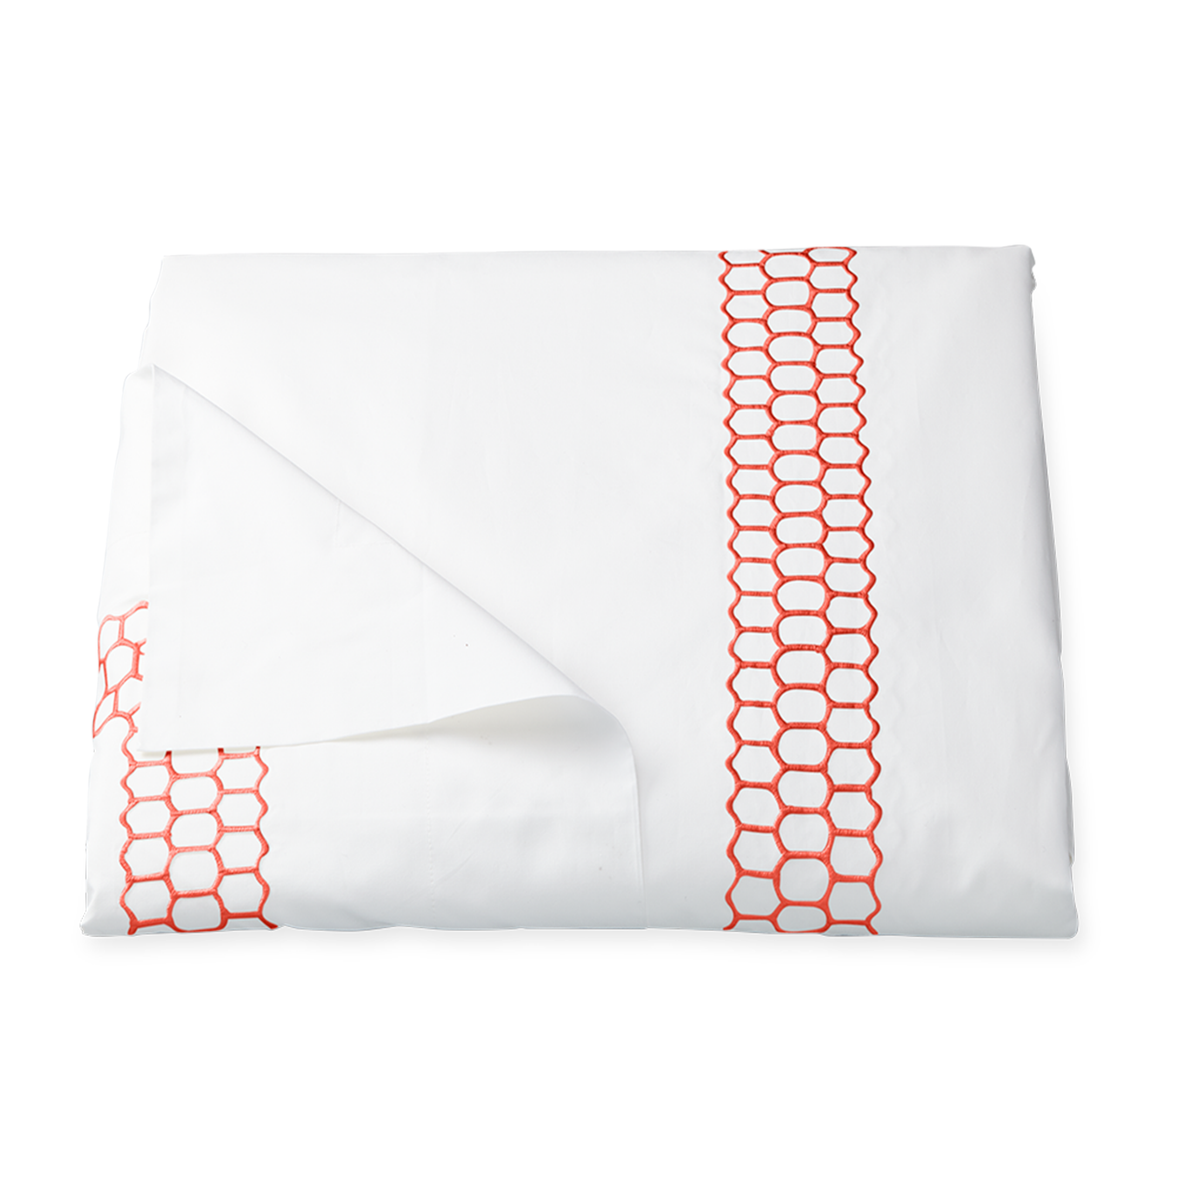 Clear Image of Matouk Liana Bedding Duvet Cover in Coral Color